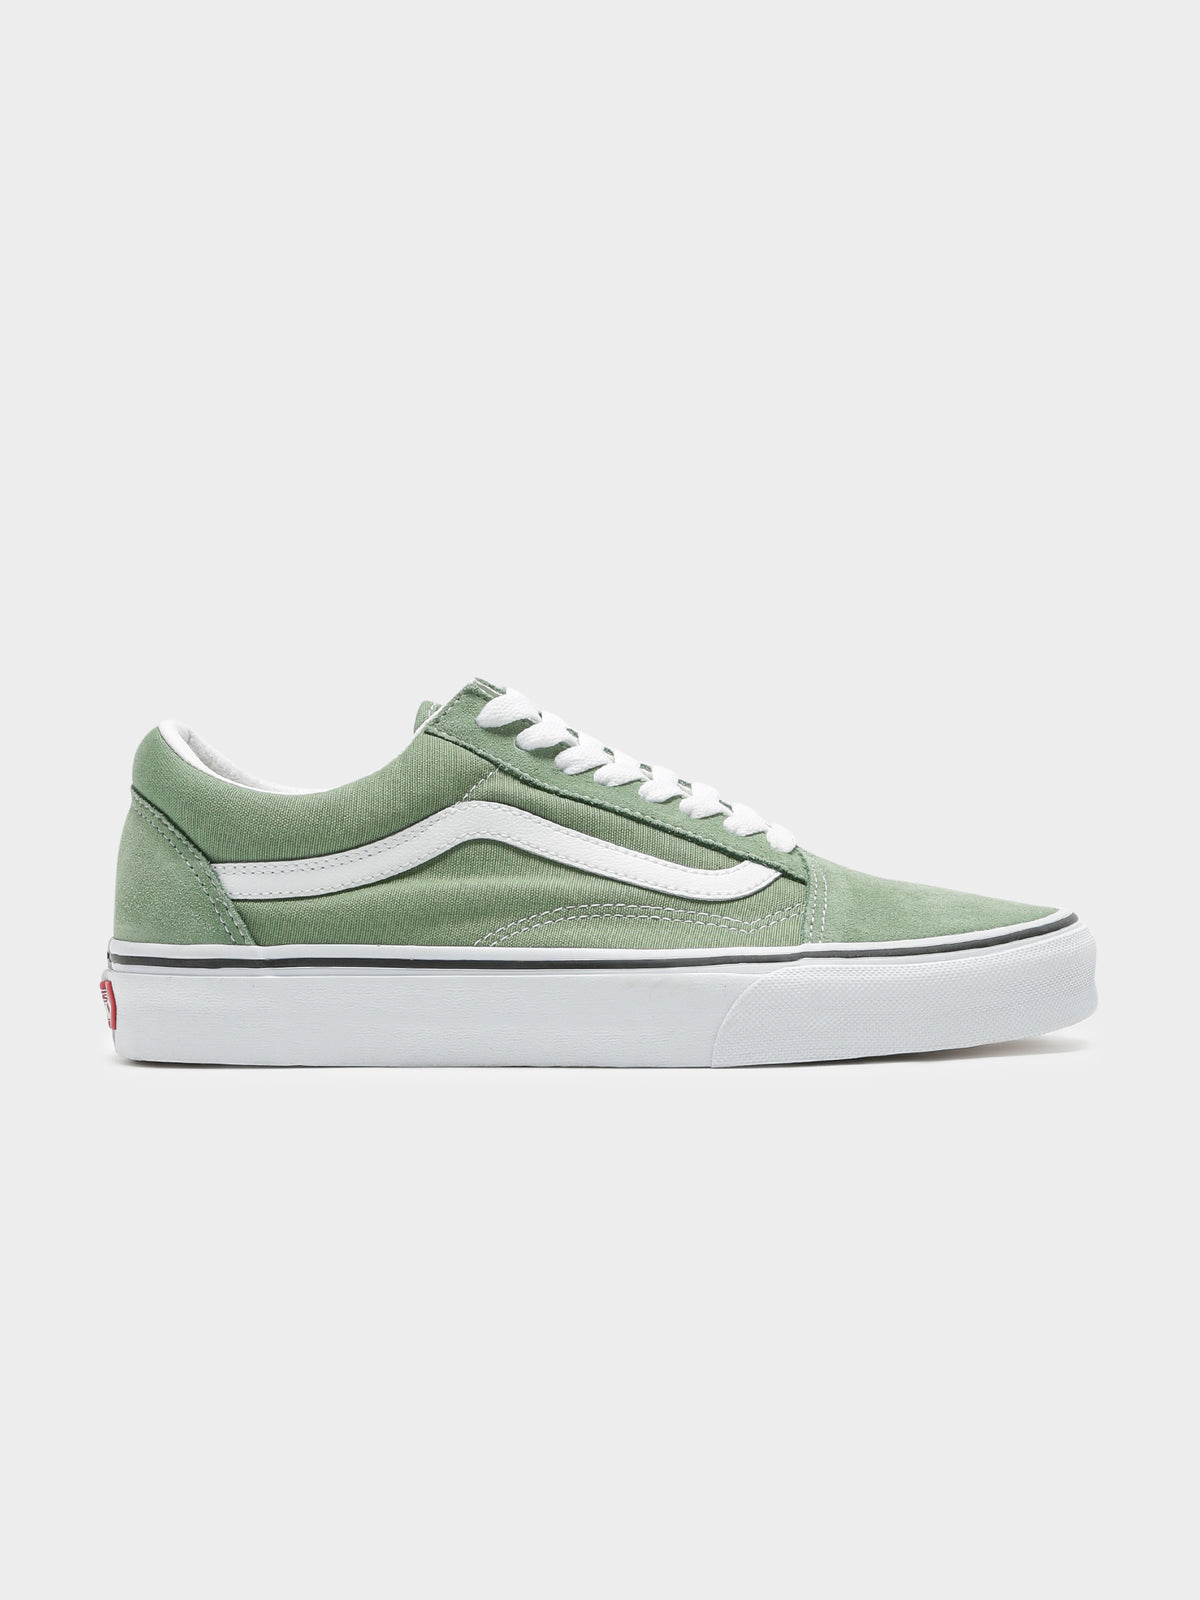 Unisex Old Skool Sneakers in Shale Green &amp; White